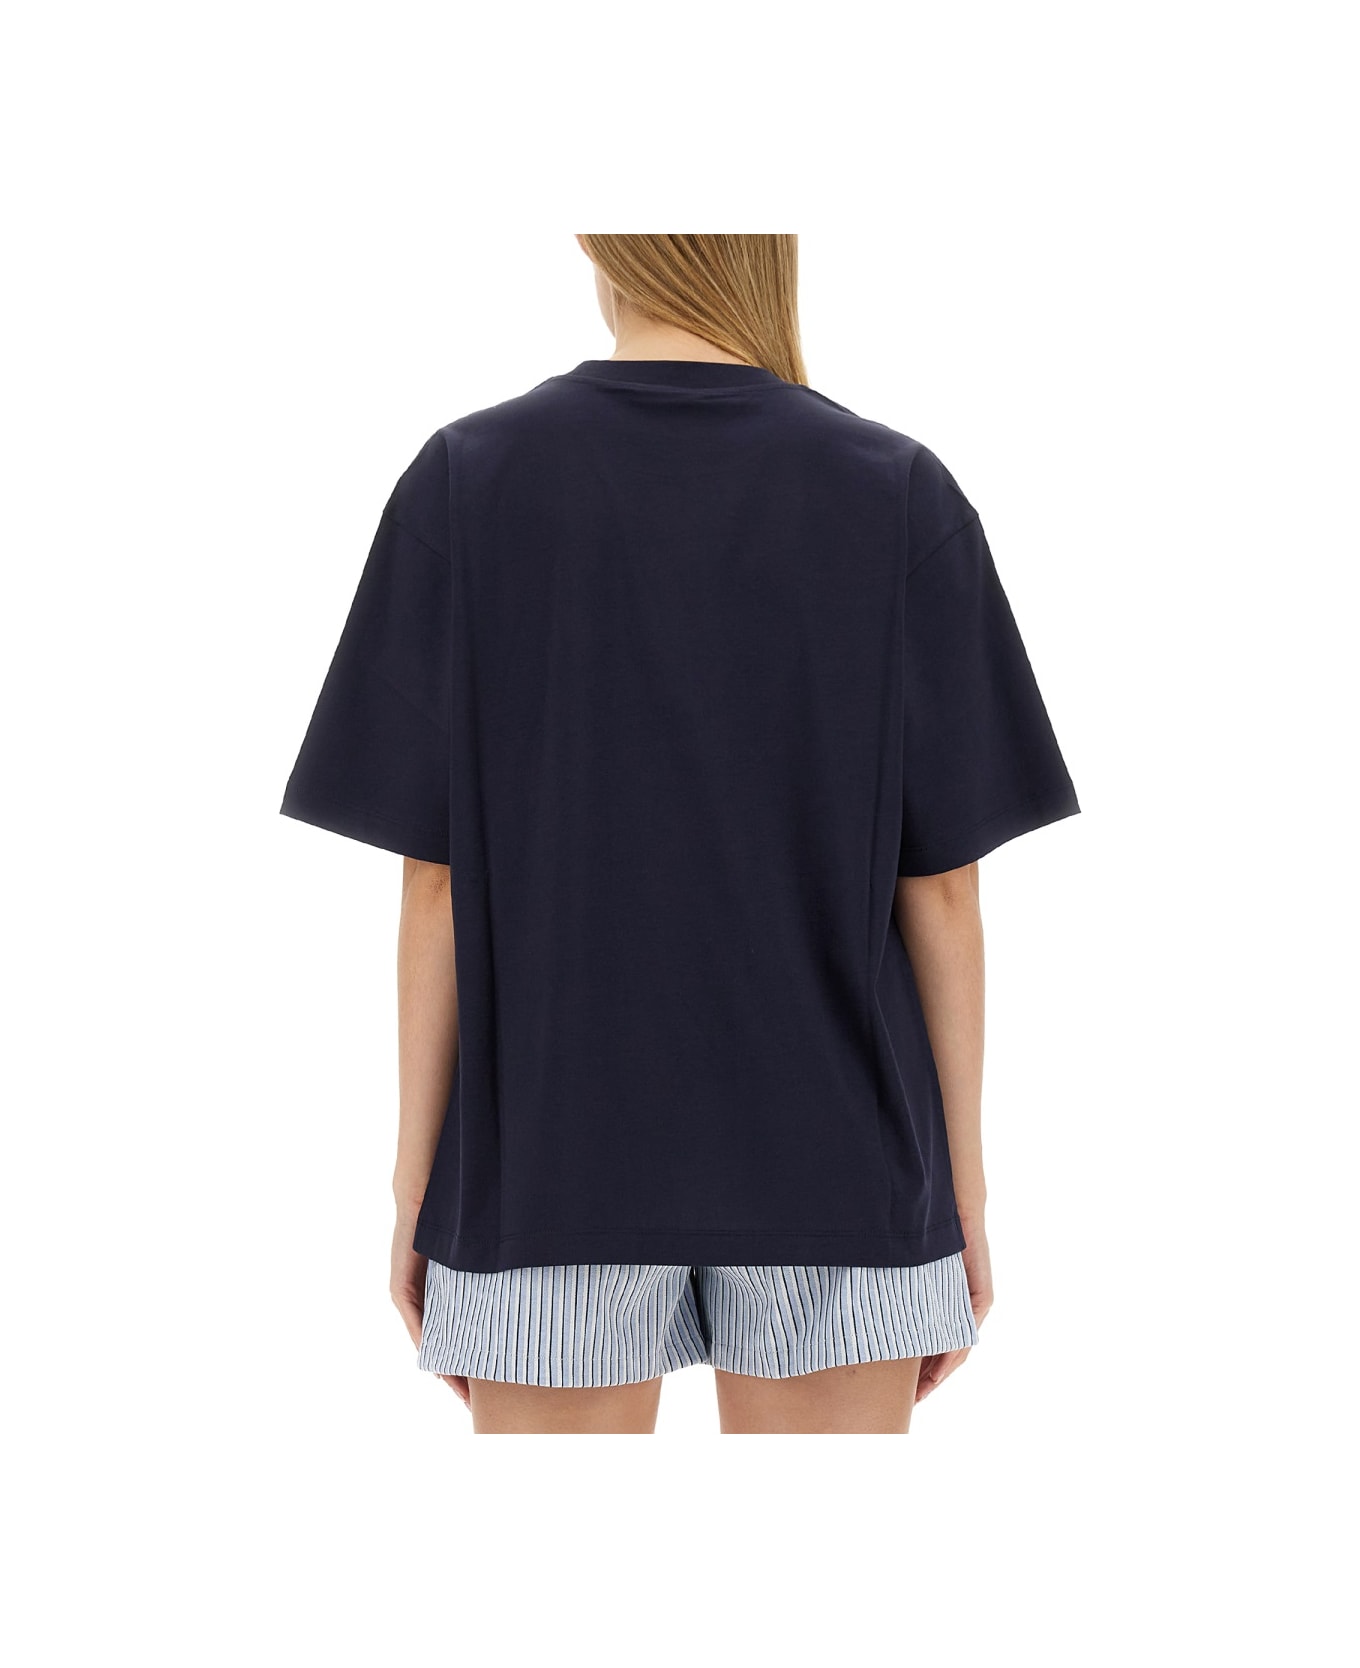 Marni T-shirt With Logo - BLUE Tシャツ